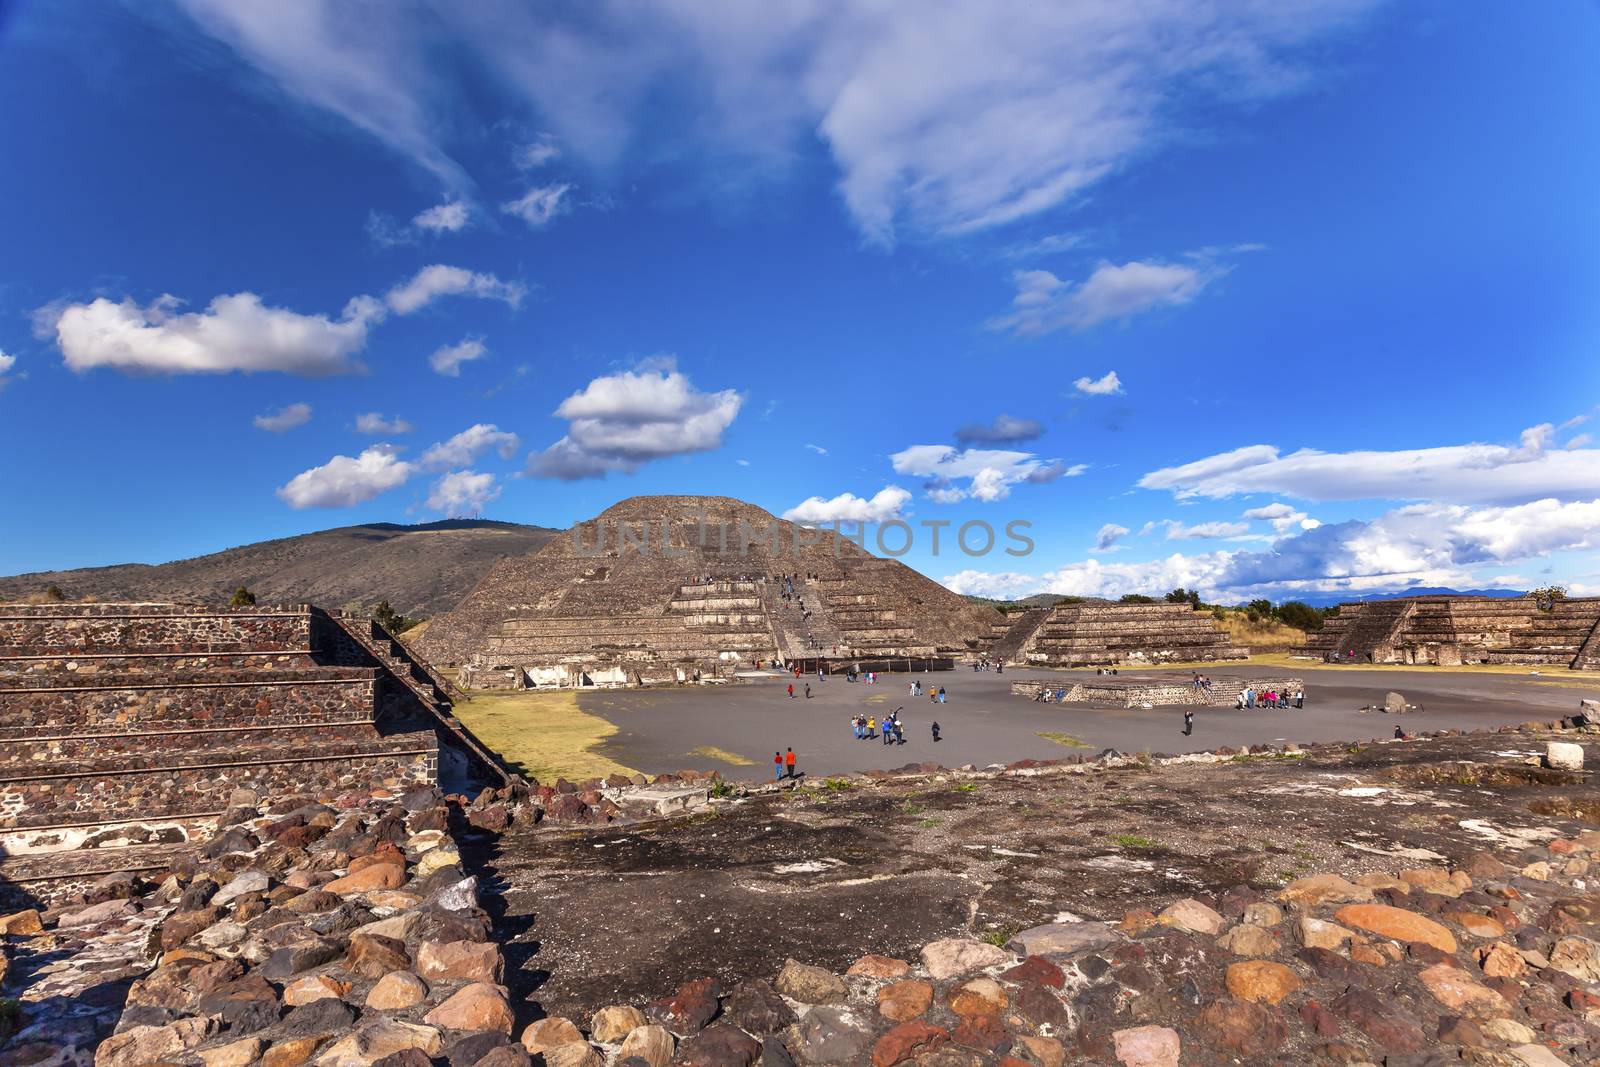 Avenue of Dead Temple of Moon Pyramid Teotihuacan Mexico City Me by bill_perry